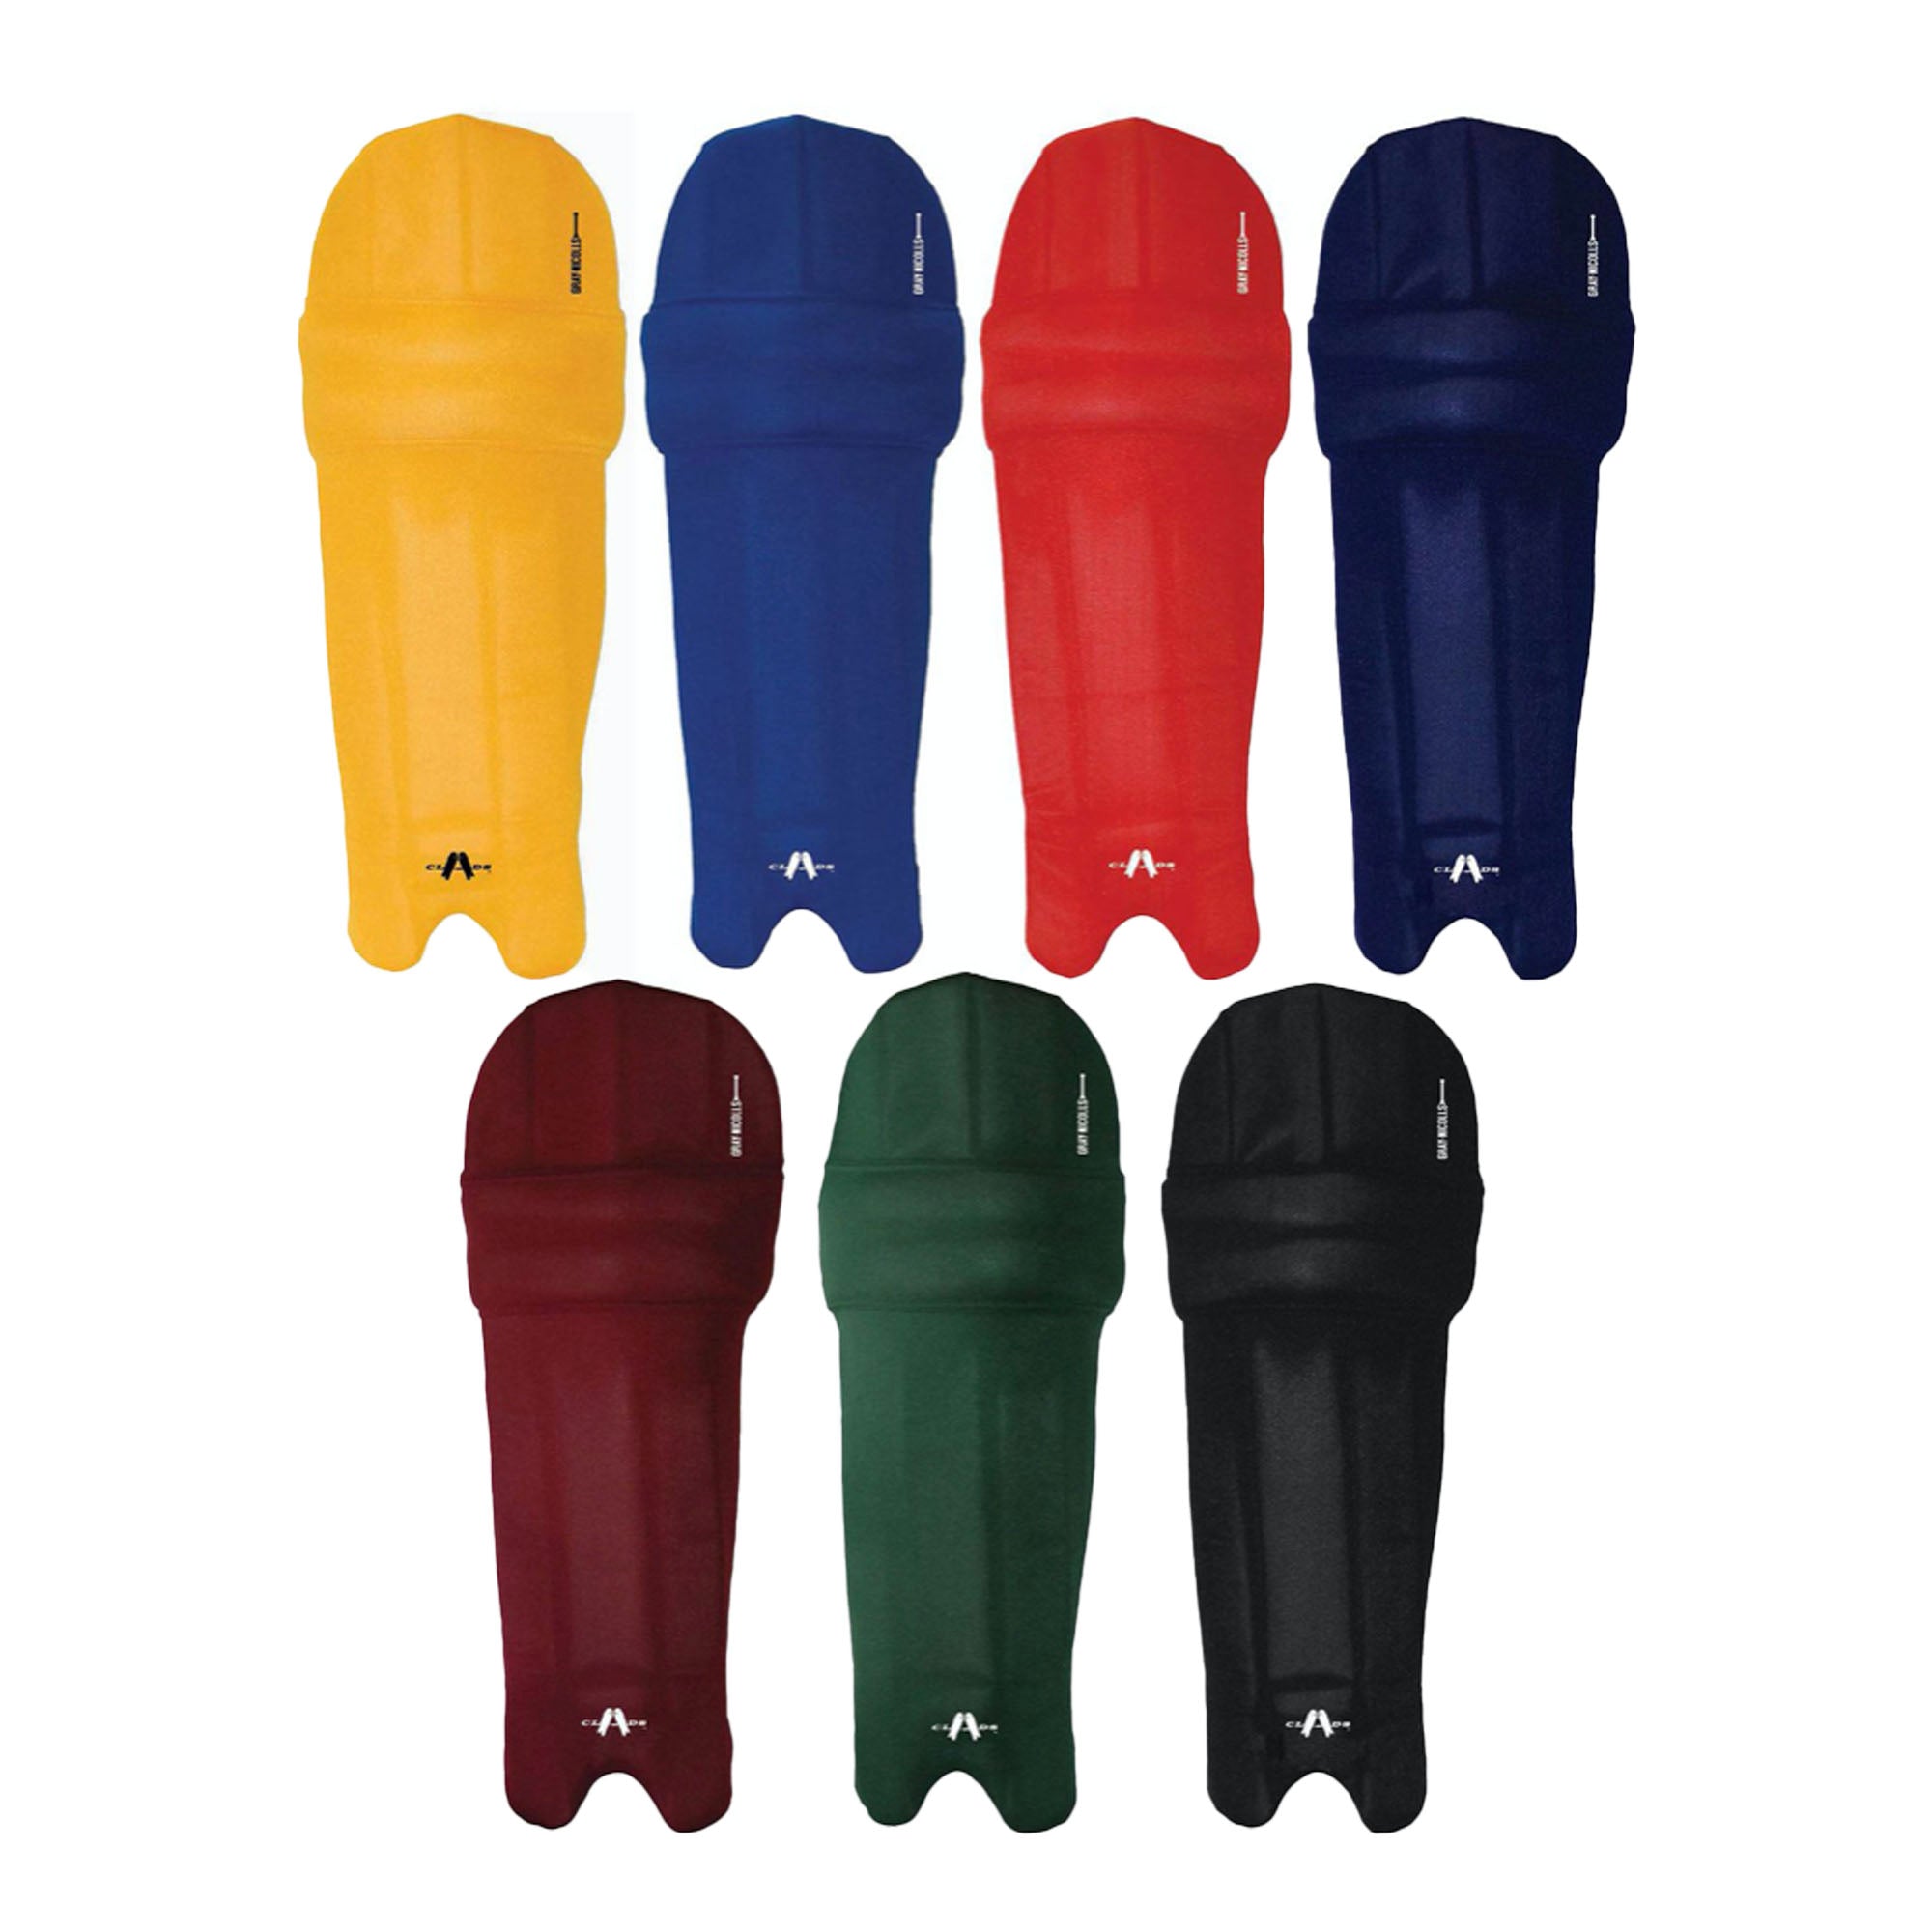 CLADS COLOURED BATTING PAD COVERS - YOUTH